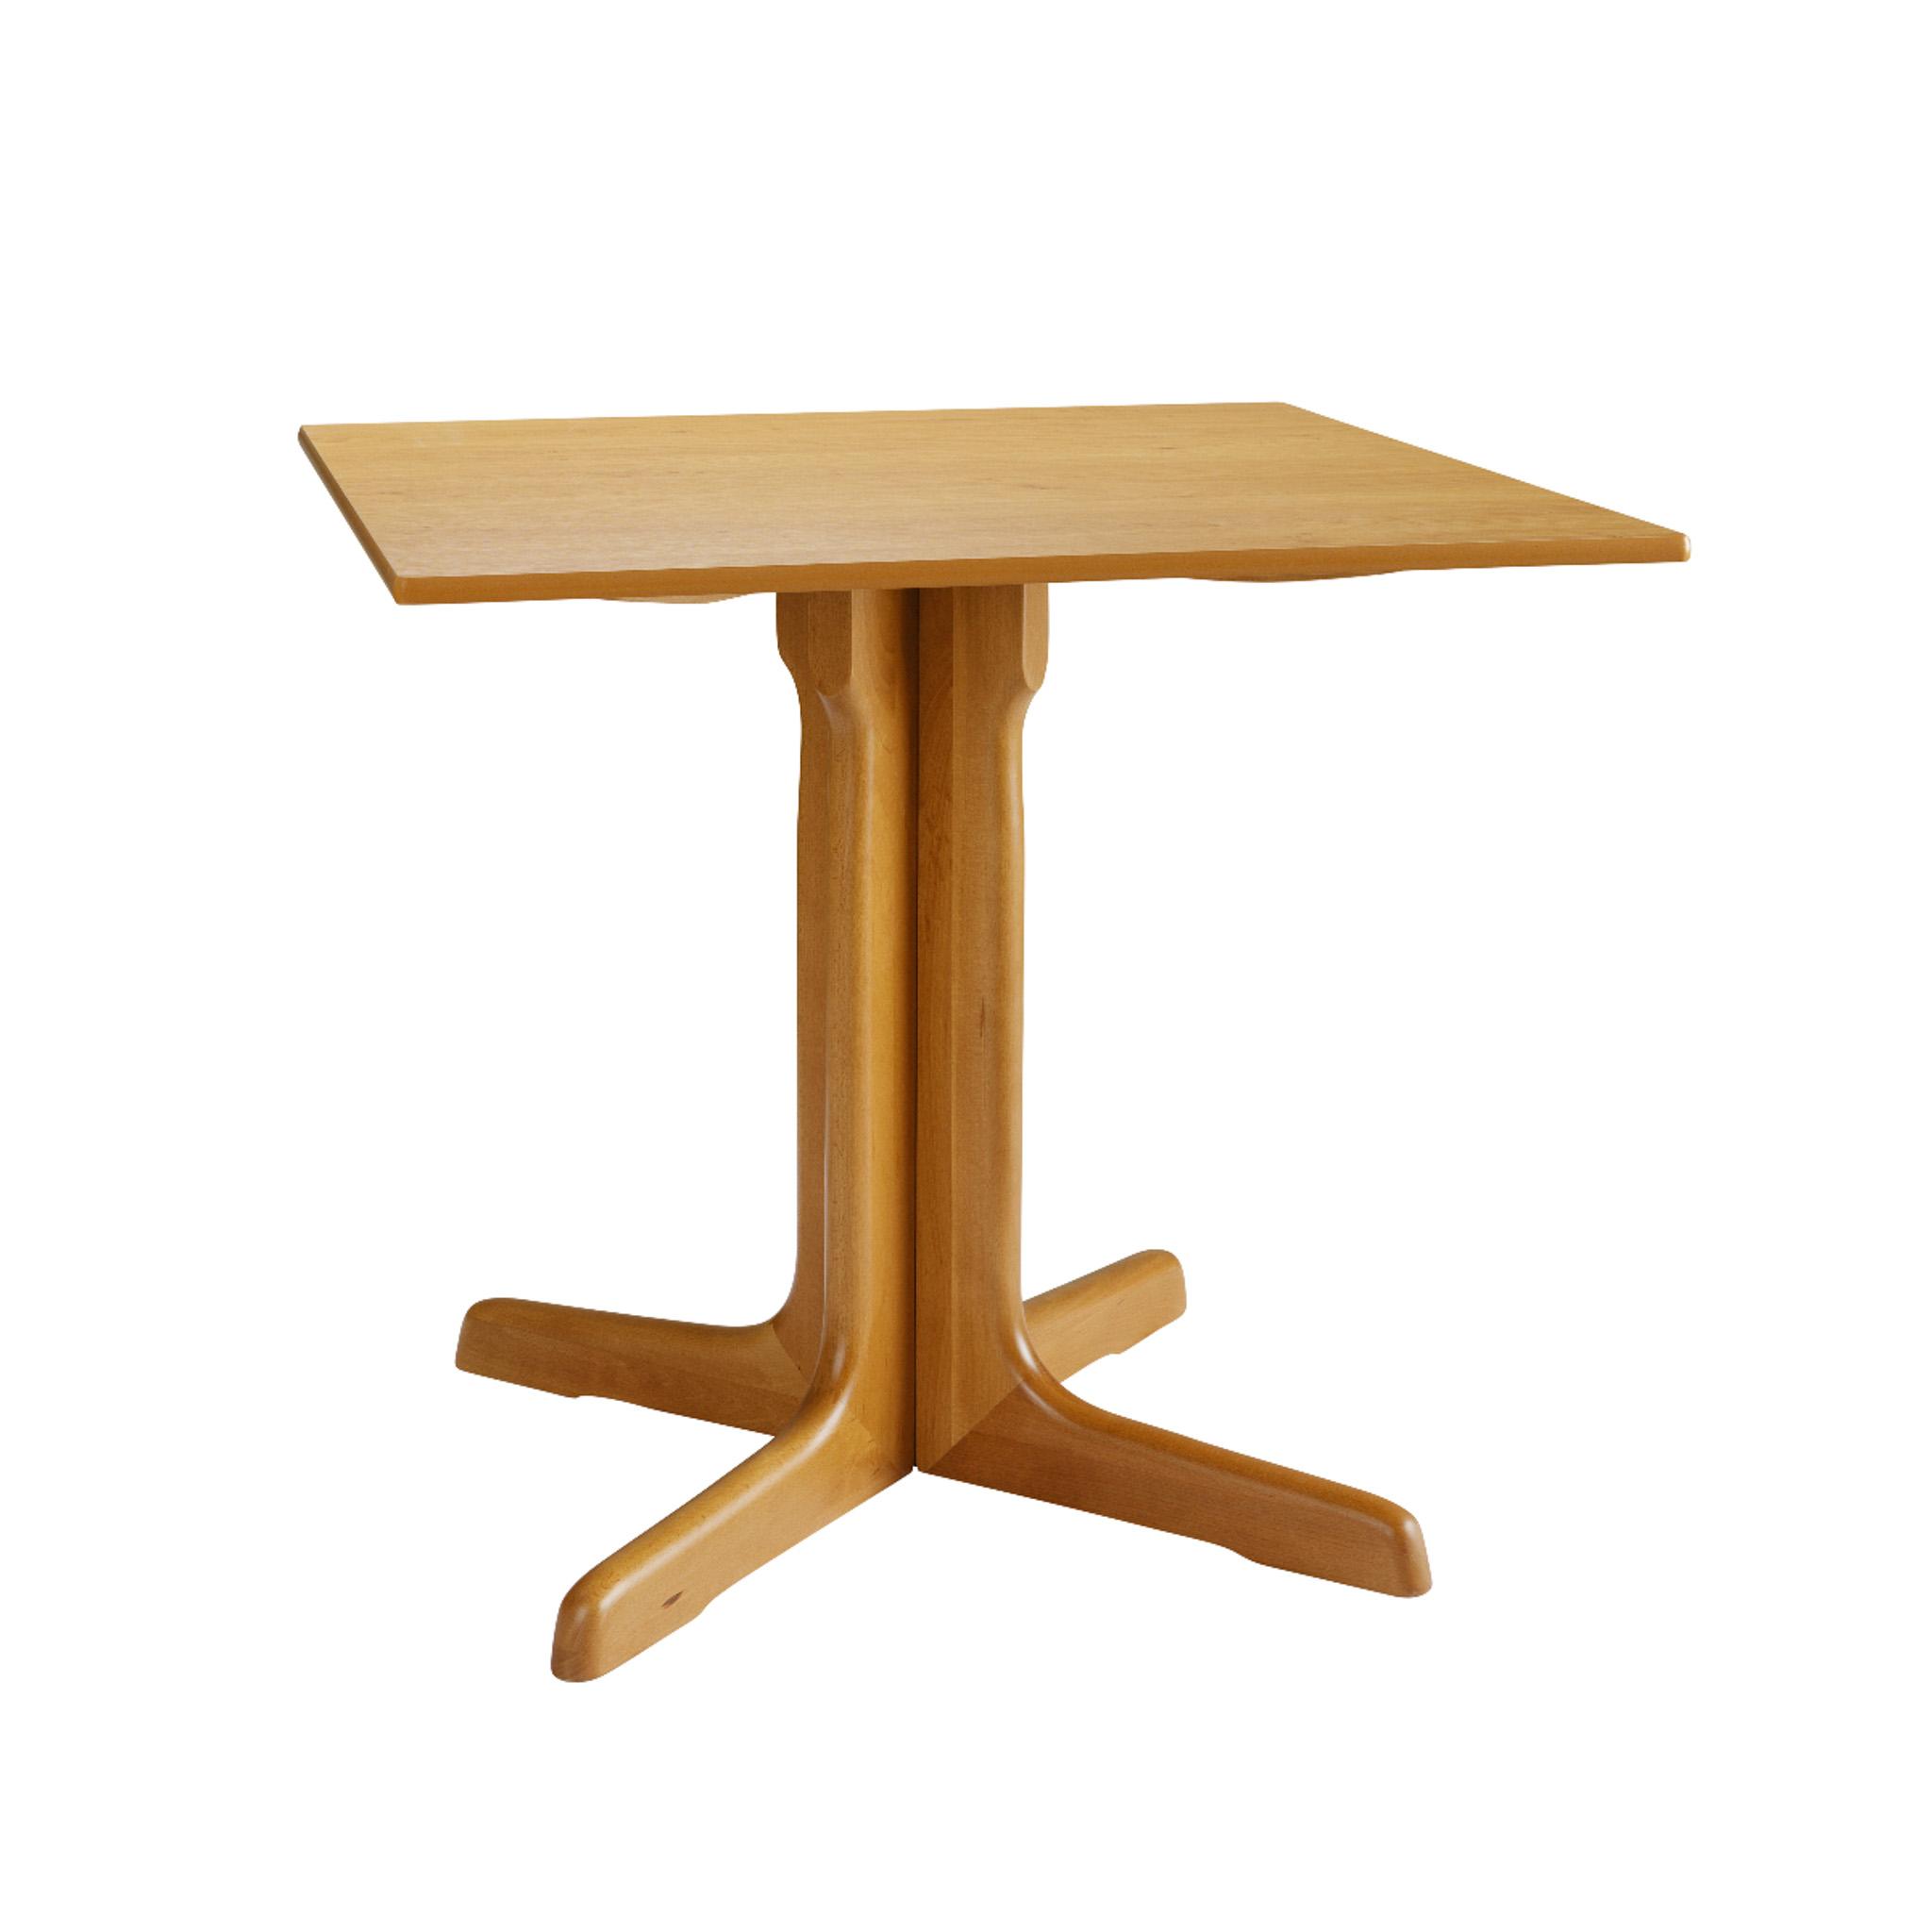 Marlow Square Pedestal Table in Winchester Oak